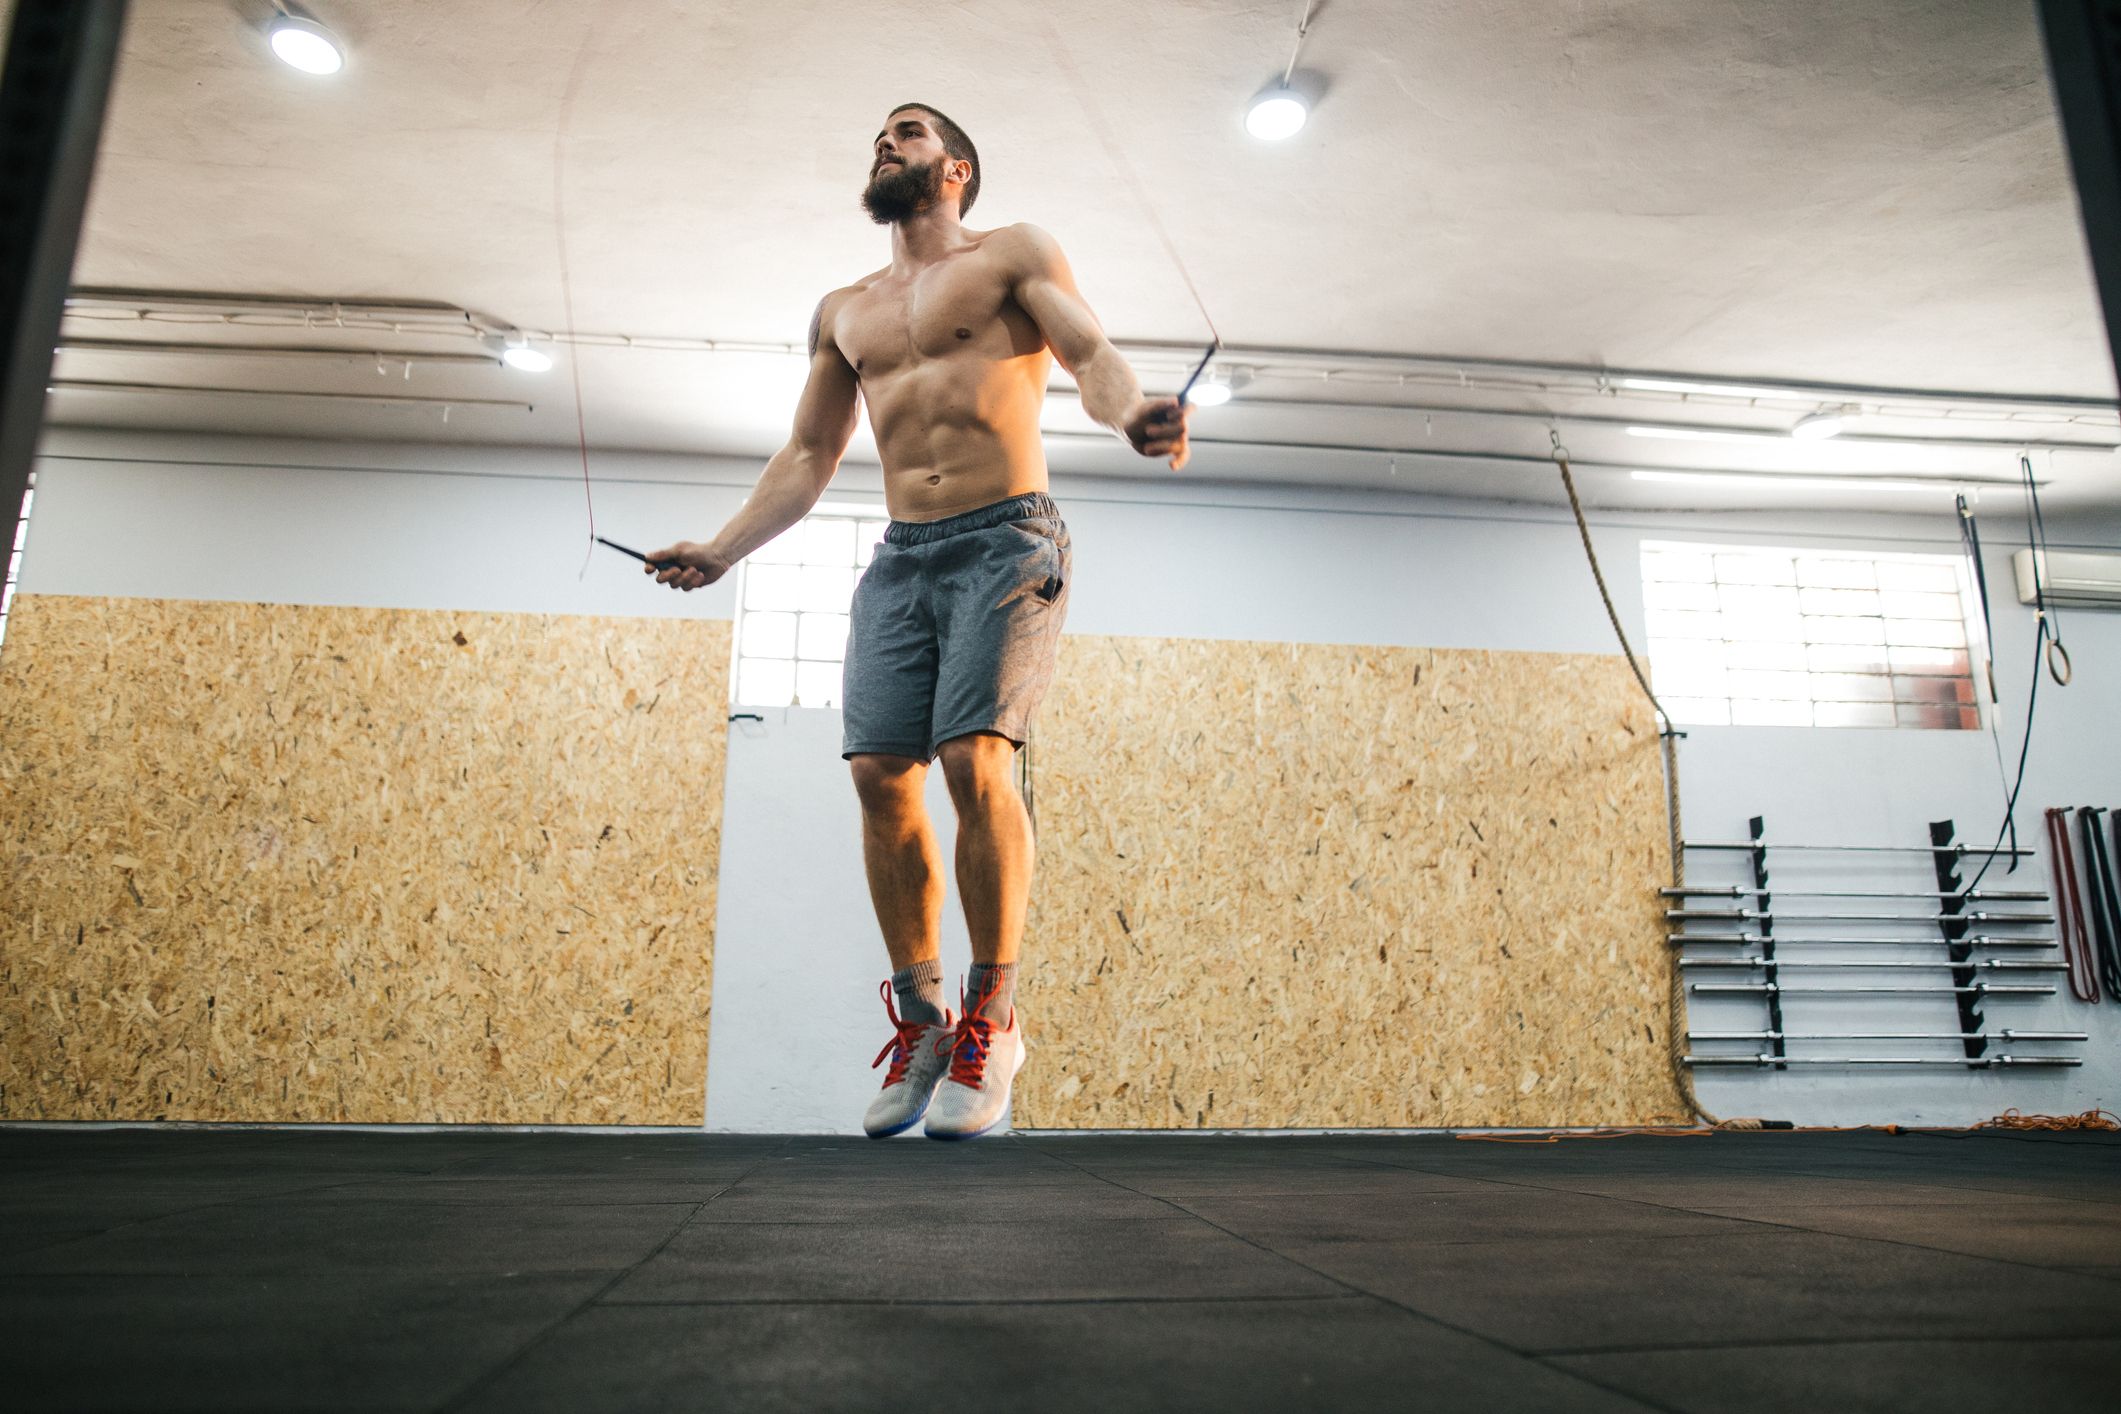 The 8 Best Jump Ropes for CrossFit Workouts - Double-Under Ropes